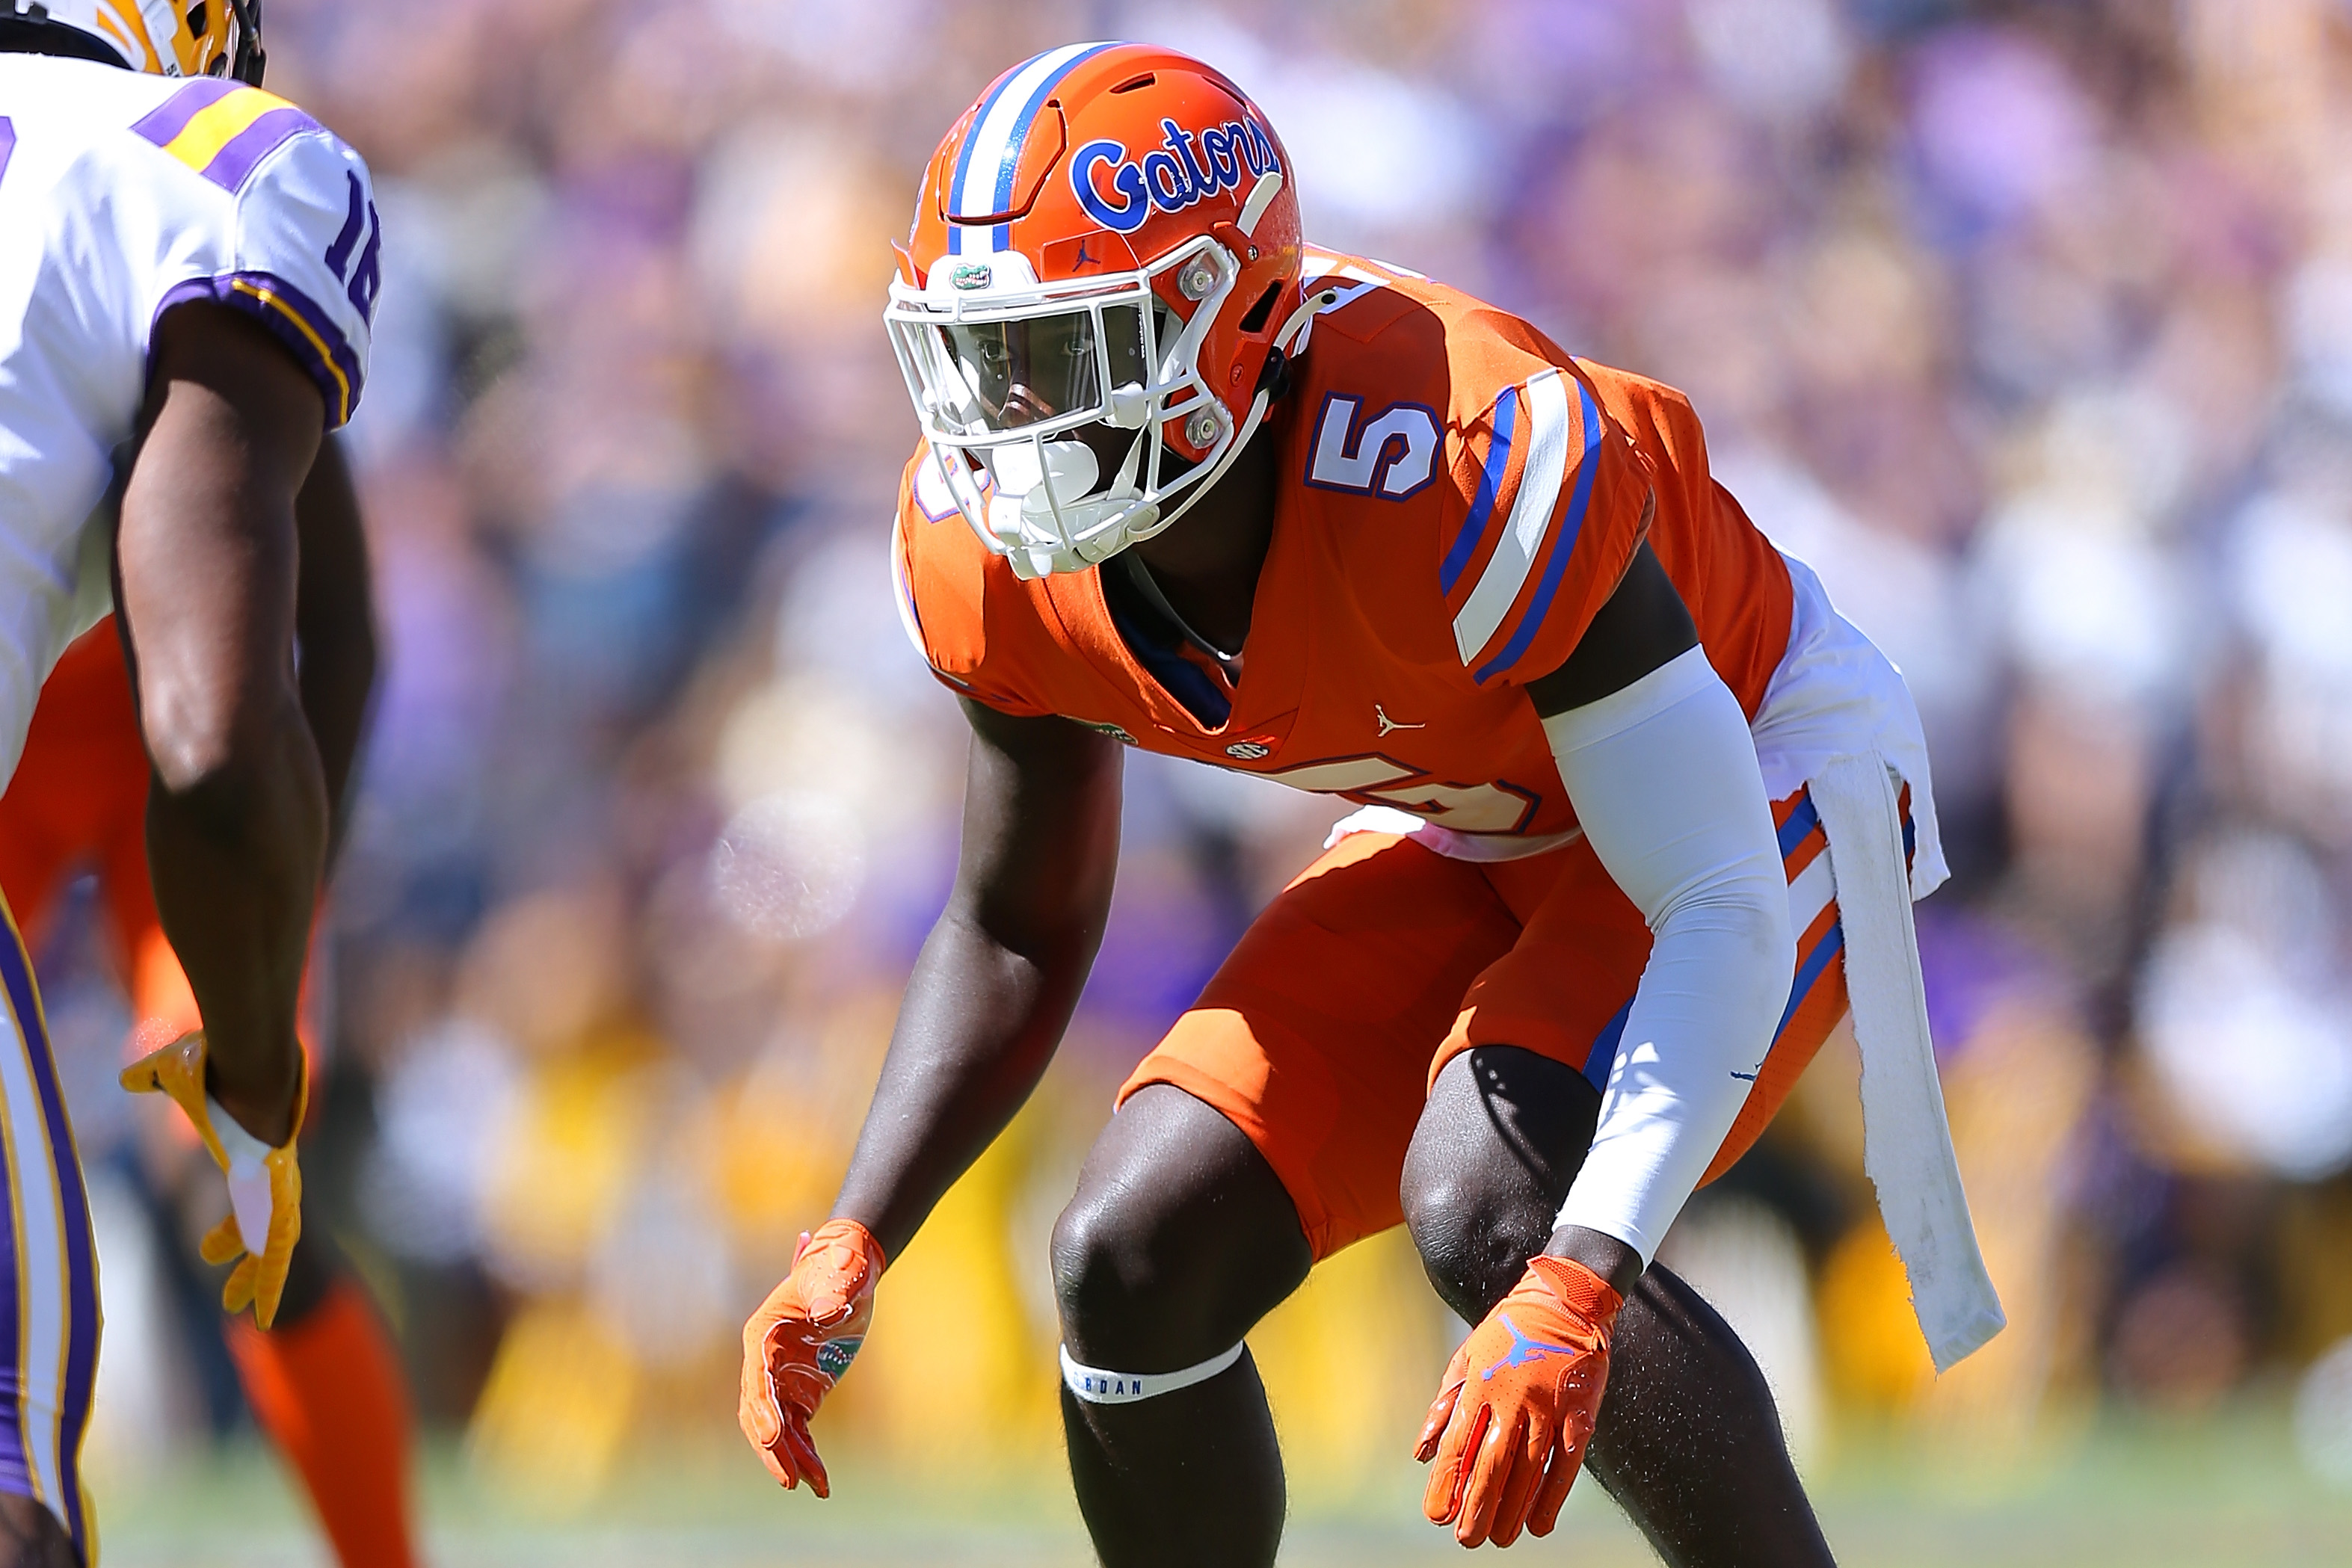 Florida CB Kaiir Elam declared for the 2022 NFL Draft. Elam (6-2, 196lbs)  is ranked as one of the top cornerbacks in this year's draft…